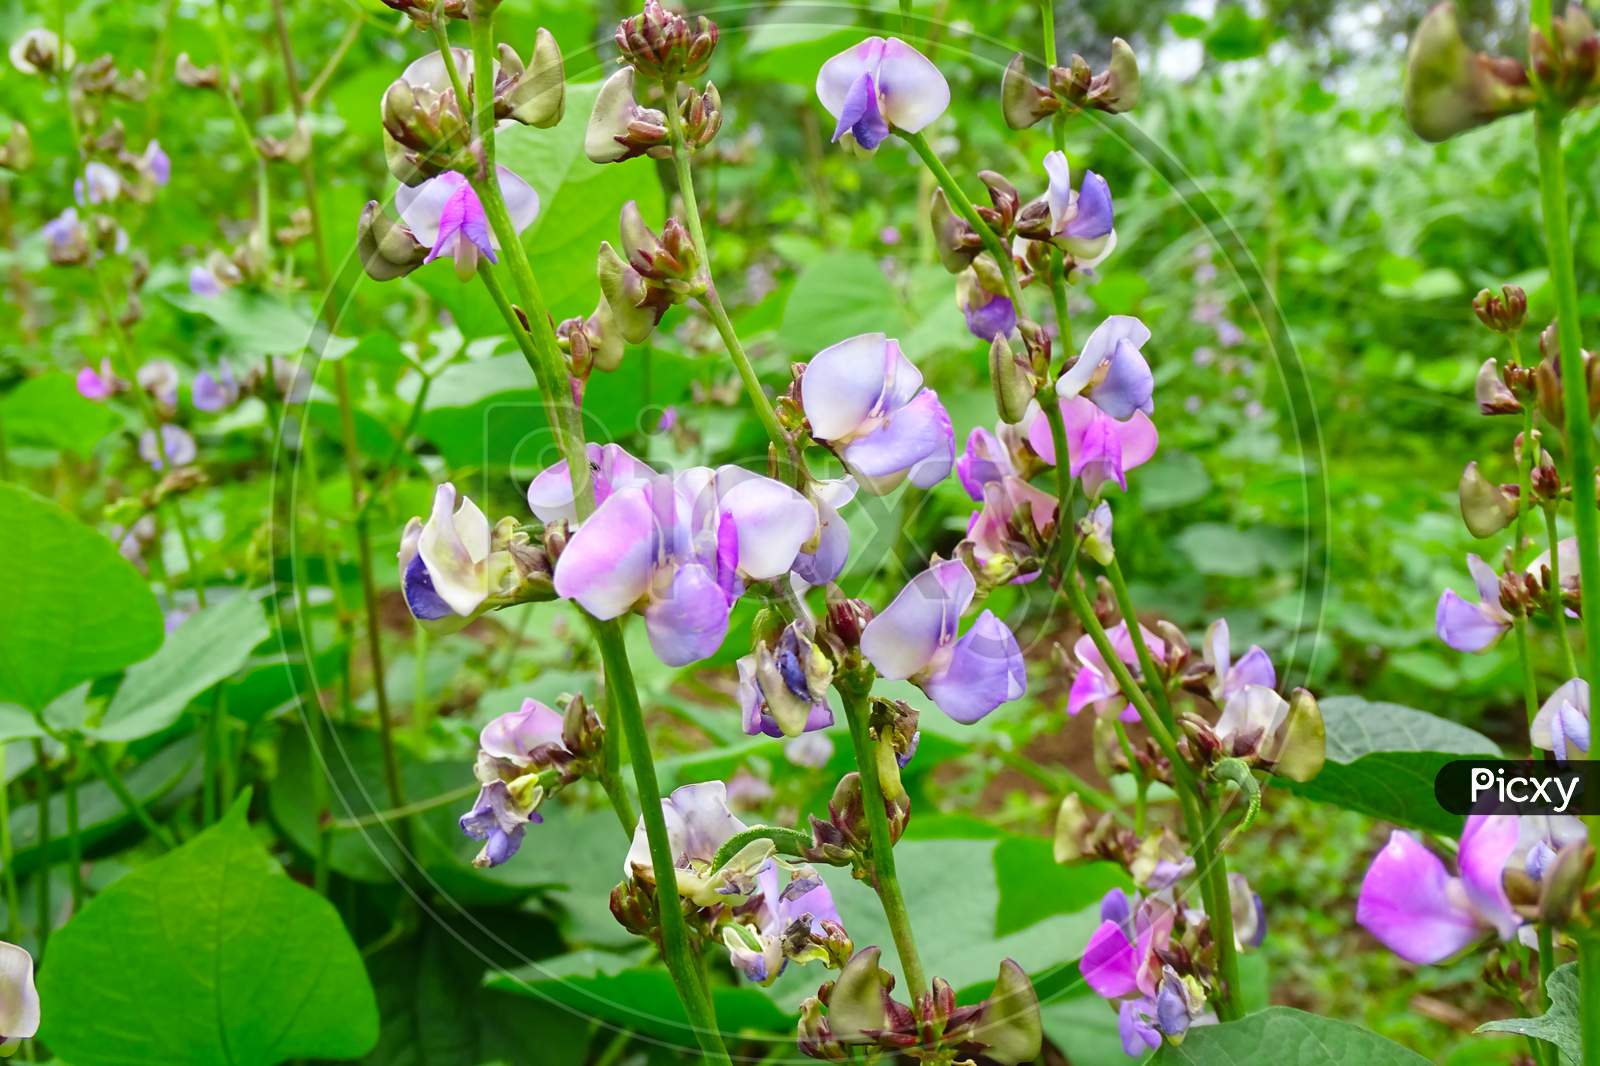 Bean flower in garden with green leaves . Pink Bean flower blooming brightly in the field. Beautiful Vegetable flowers.